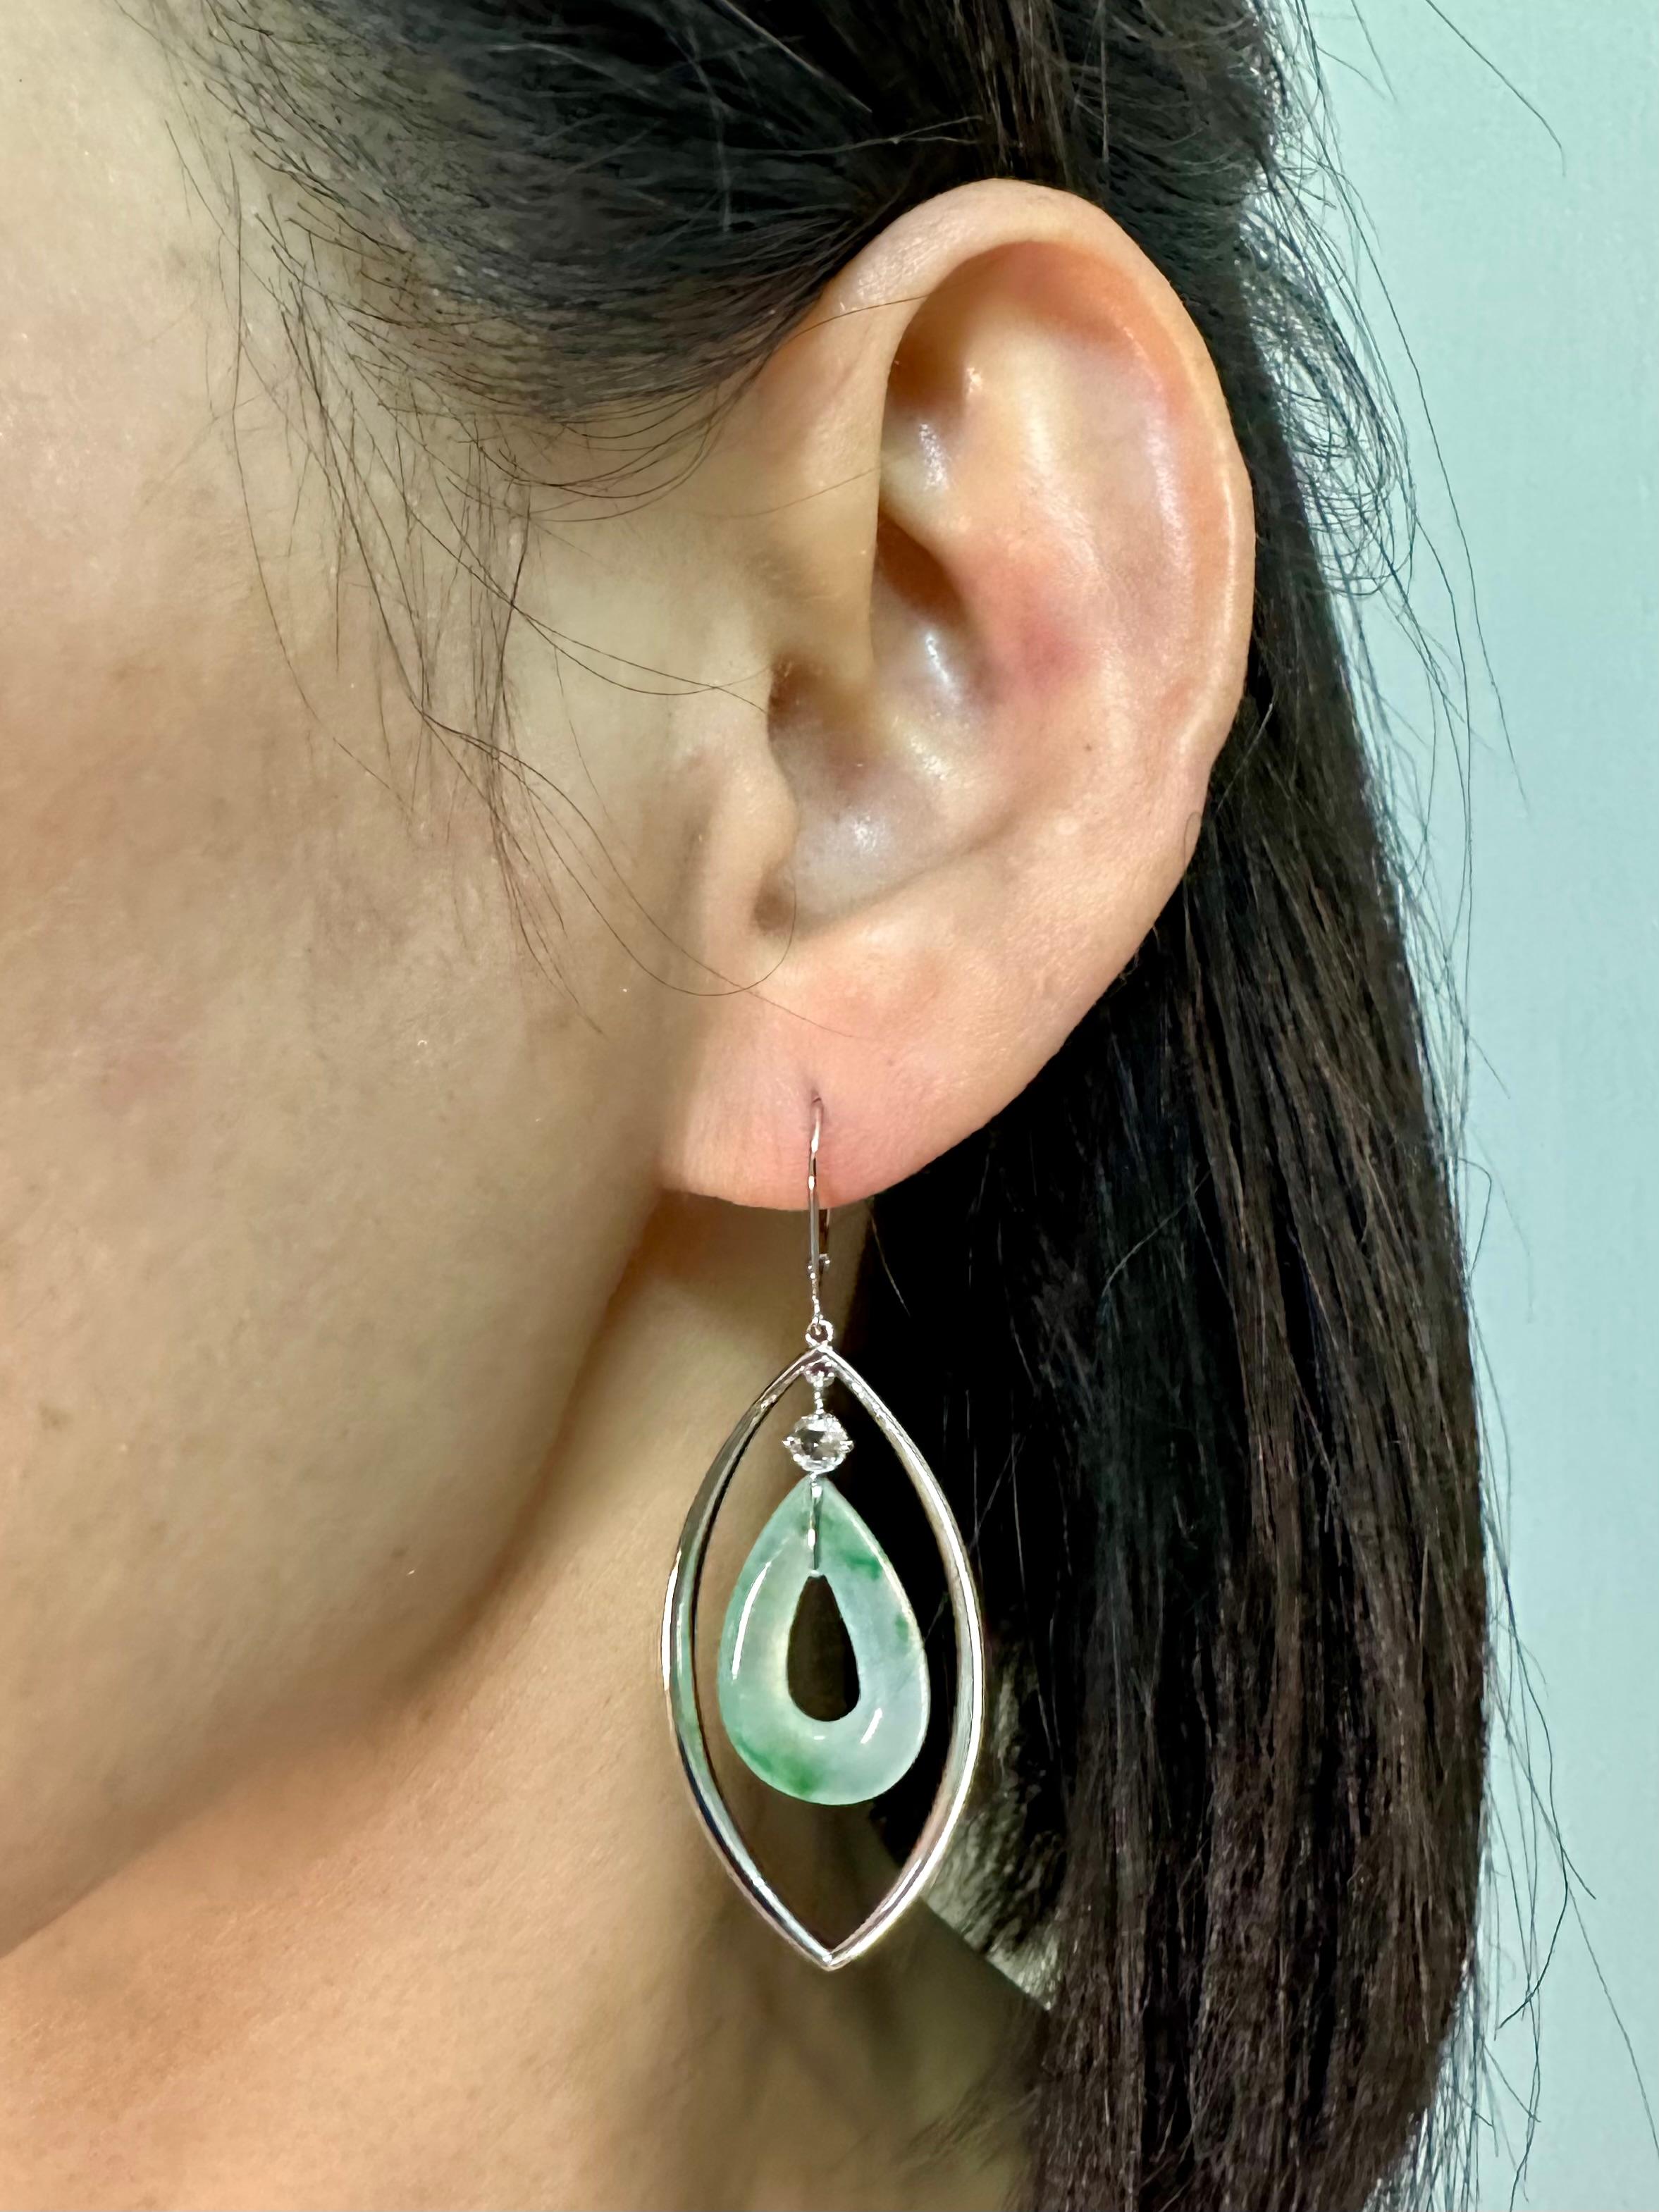 Please check out the HD video. Here is a speciality cut Jade (13.80 cts) earrings. The jade earrings are highly translucent with some apple green color veins running through them. The earrings are set in 18k white gold with 2 new rose cut diamonds